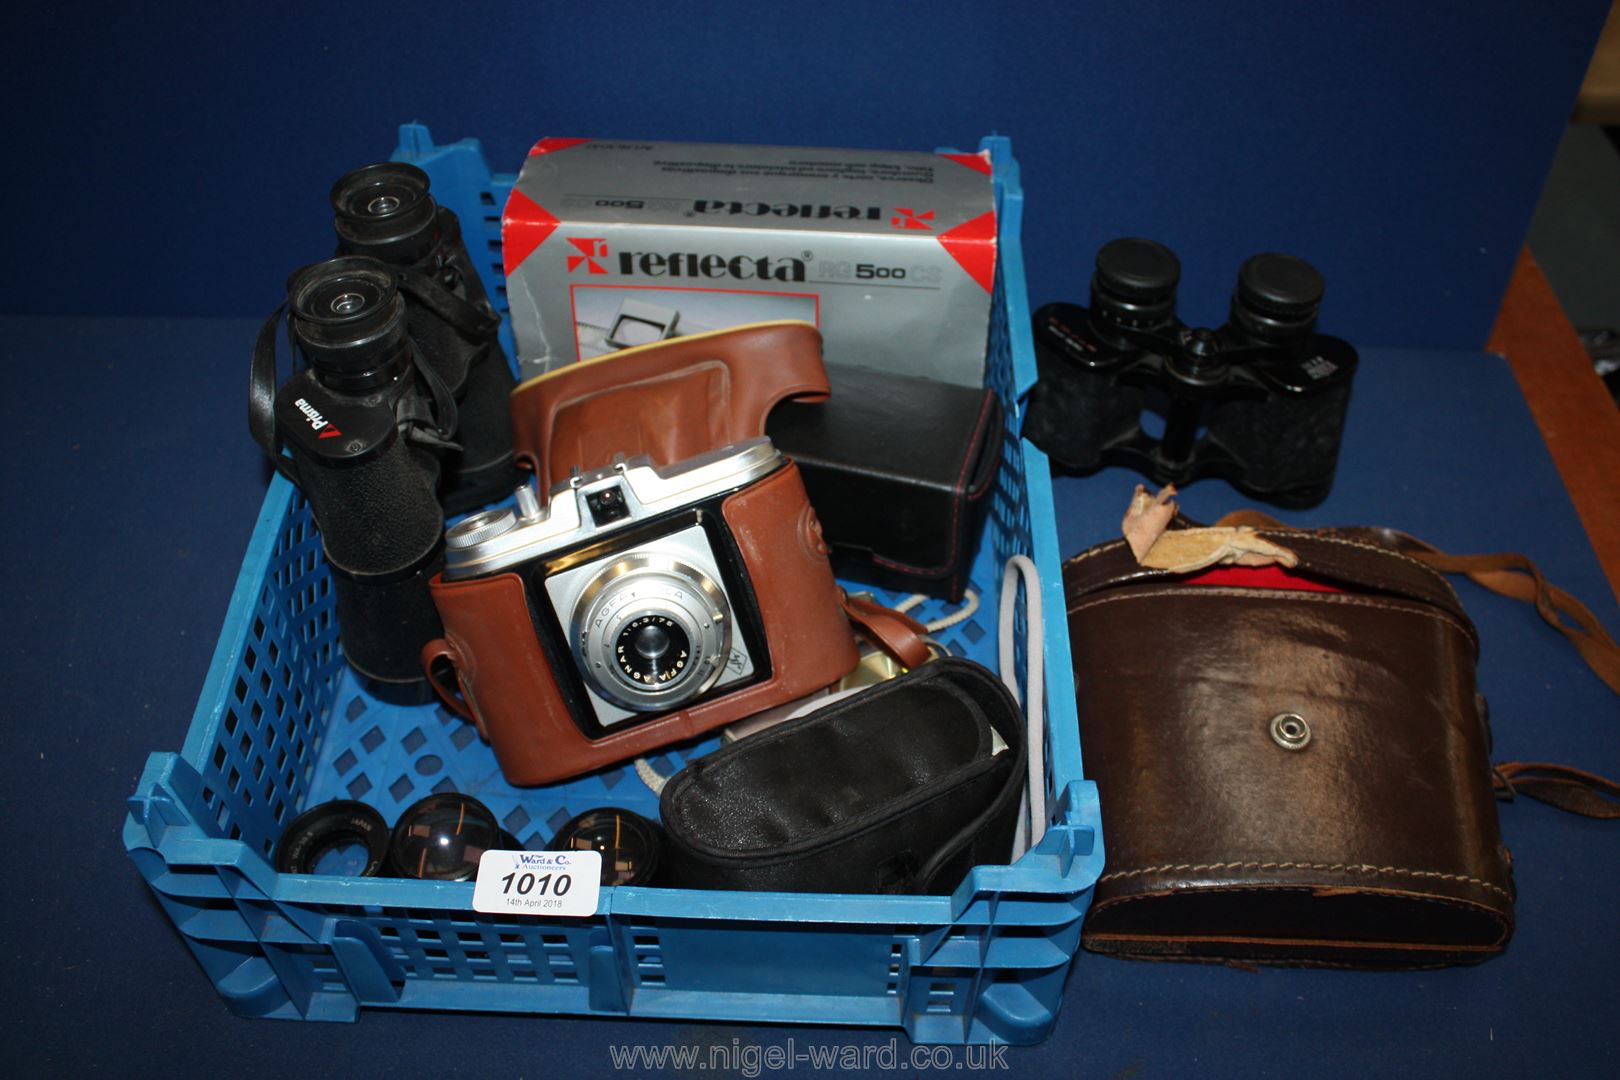 Two pairs of Binoculars - Prisma and Prinz together with cameras to include an Agfa Sola, Olympus,